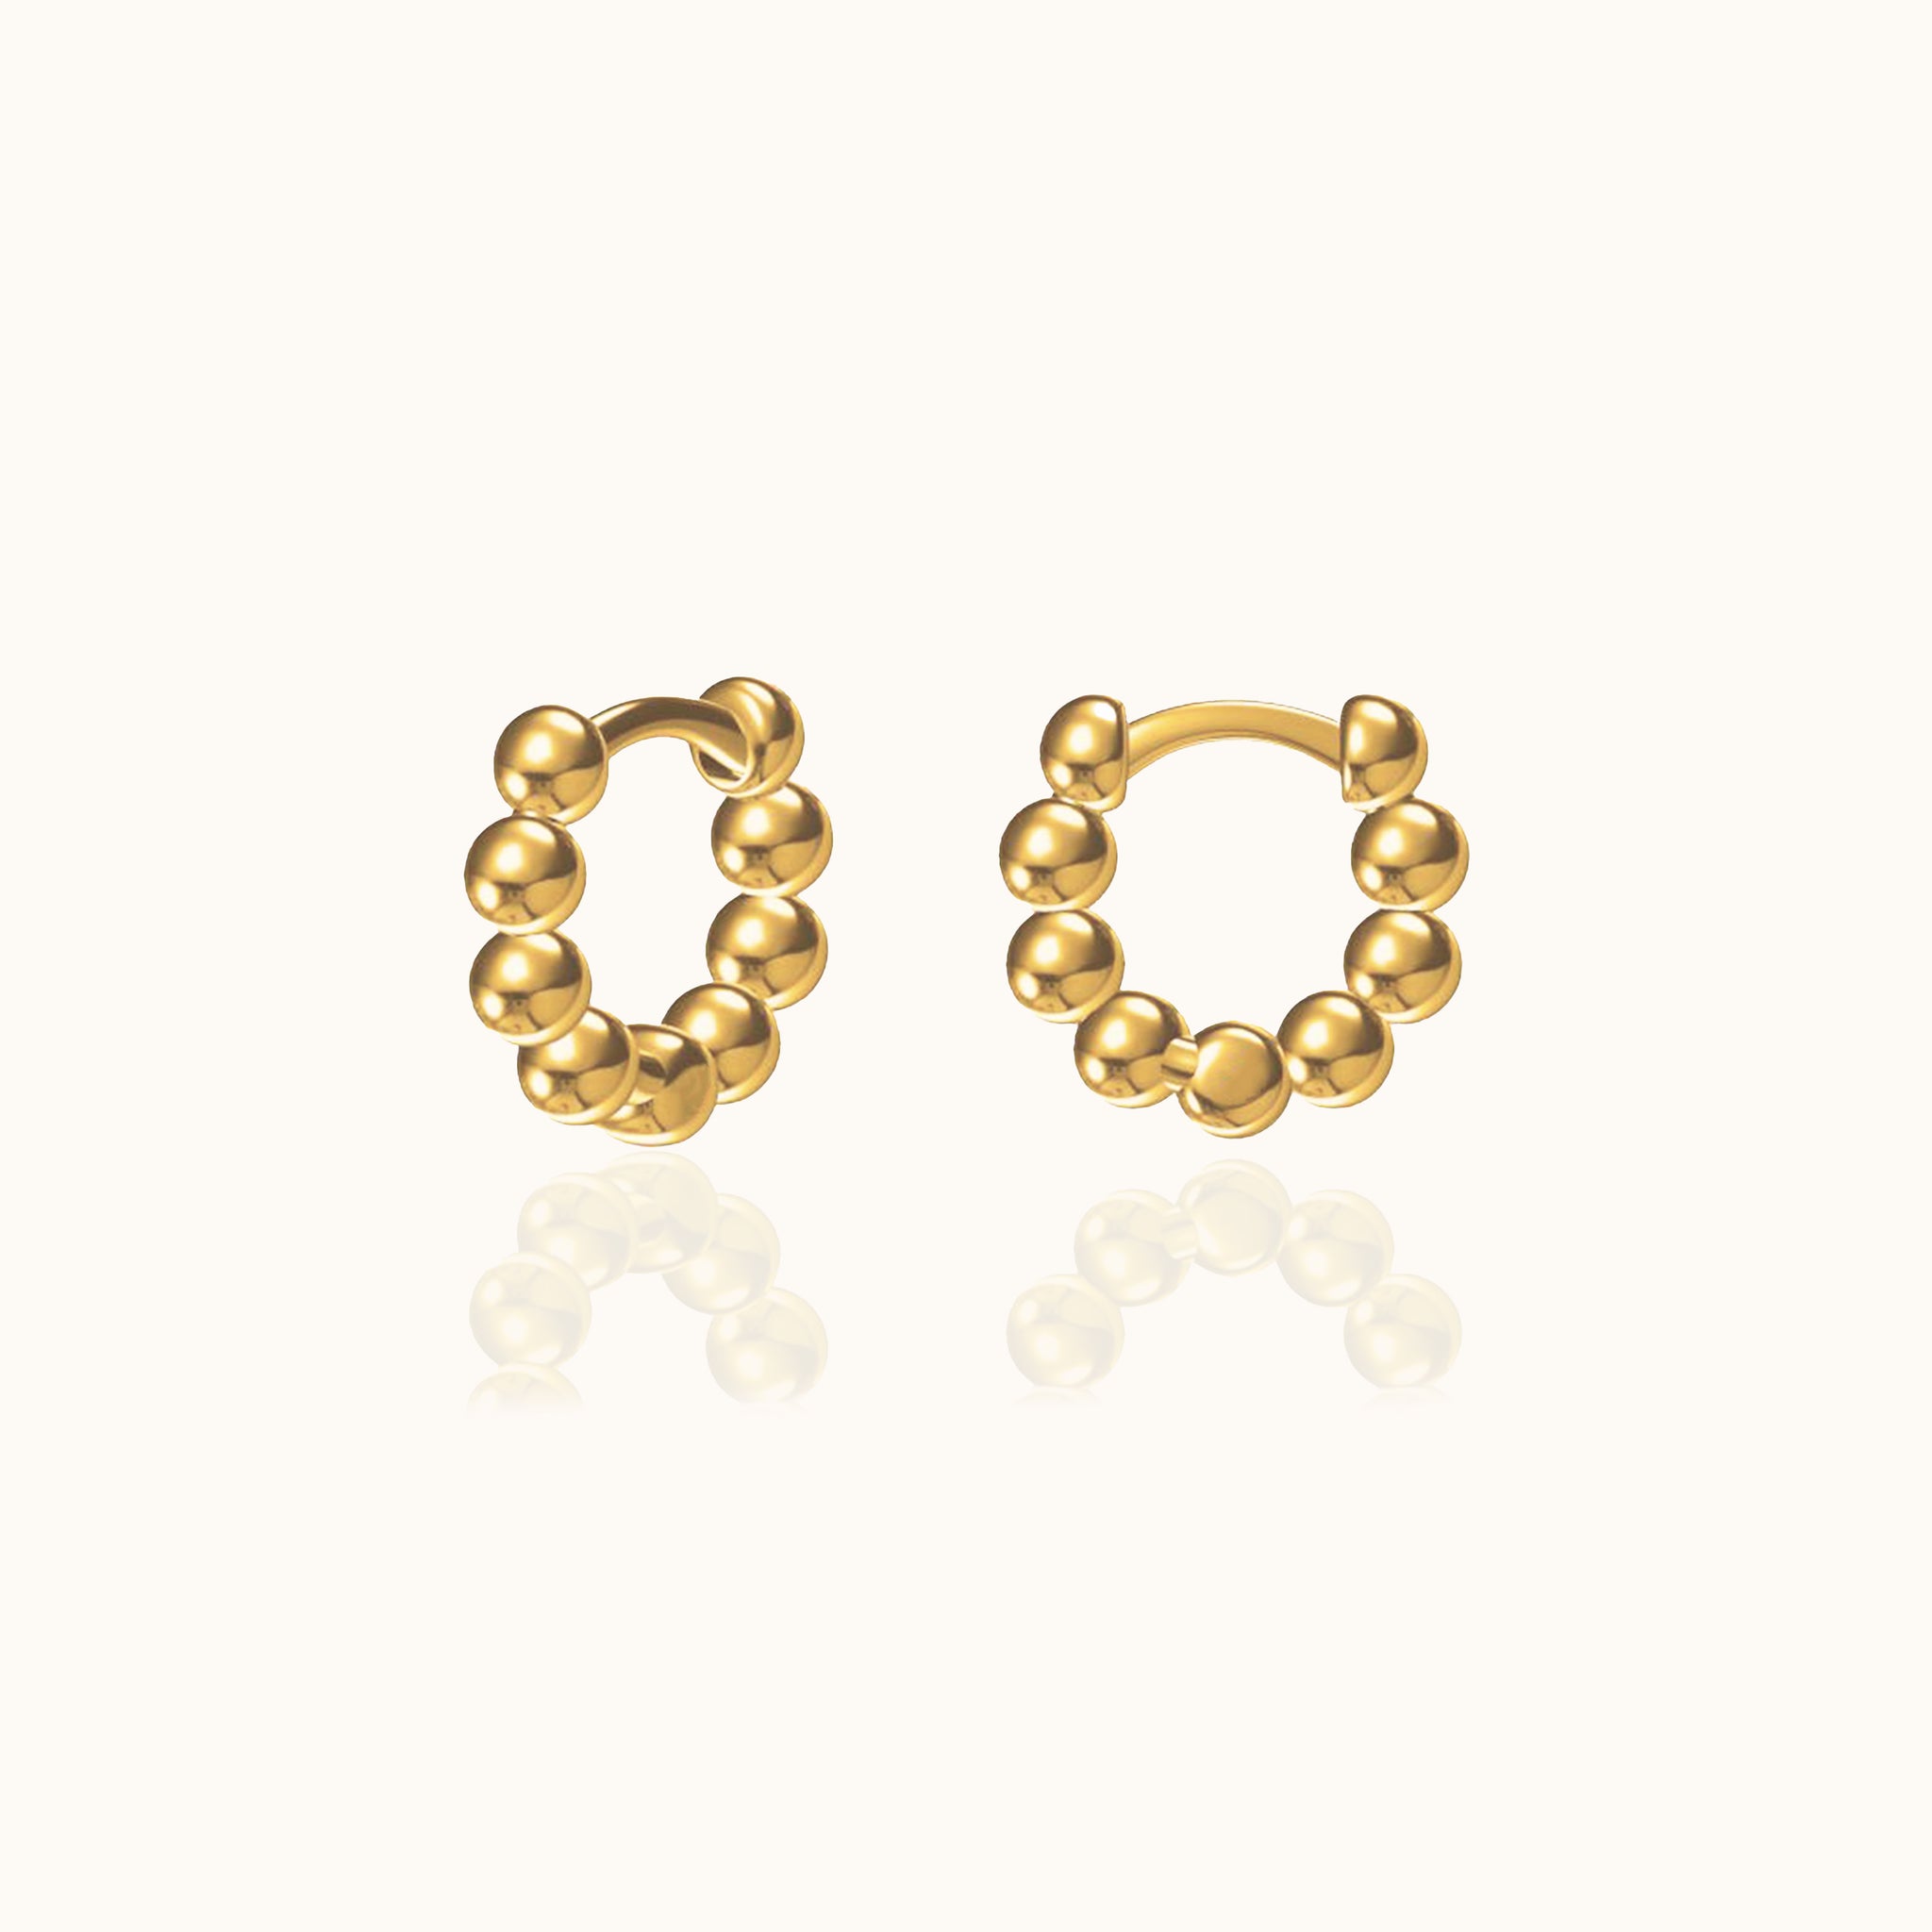 Tiny Gold Beaded Petite Thick Bead Huggie Hoop Earrings Everday Staples by Doviana